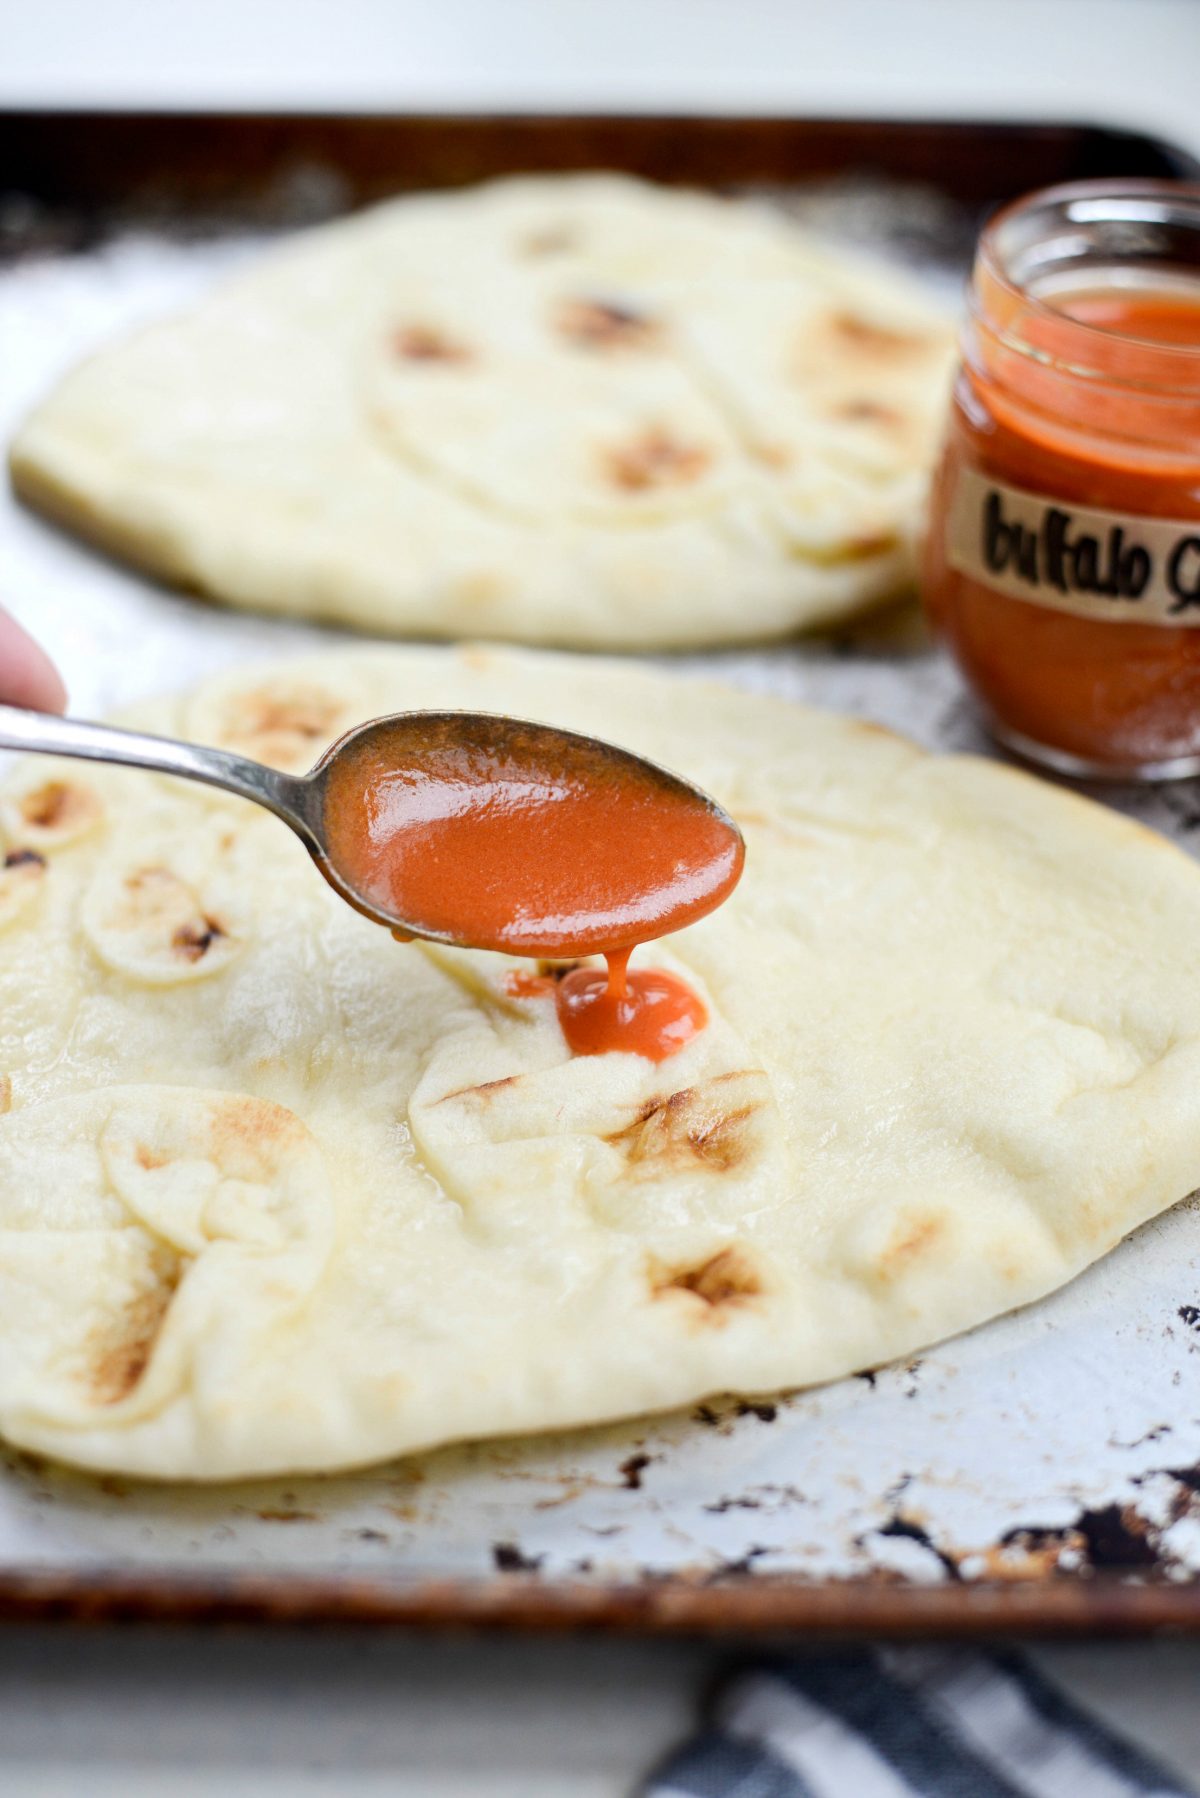 spreading spoonfuls of buffalo sauce on the naan.